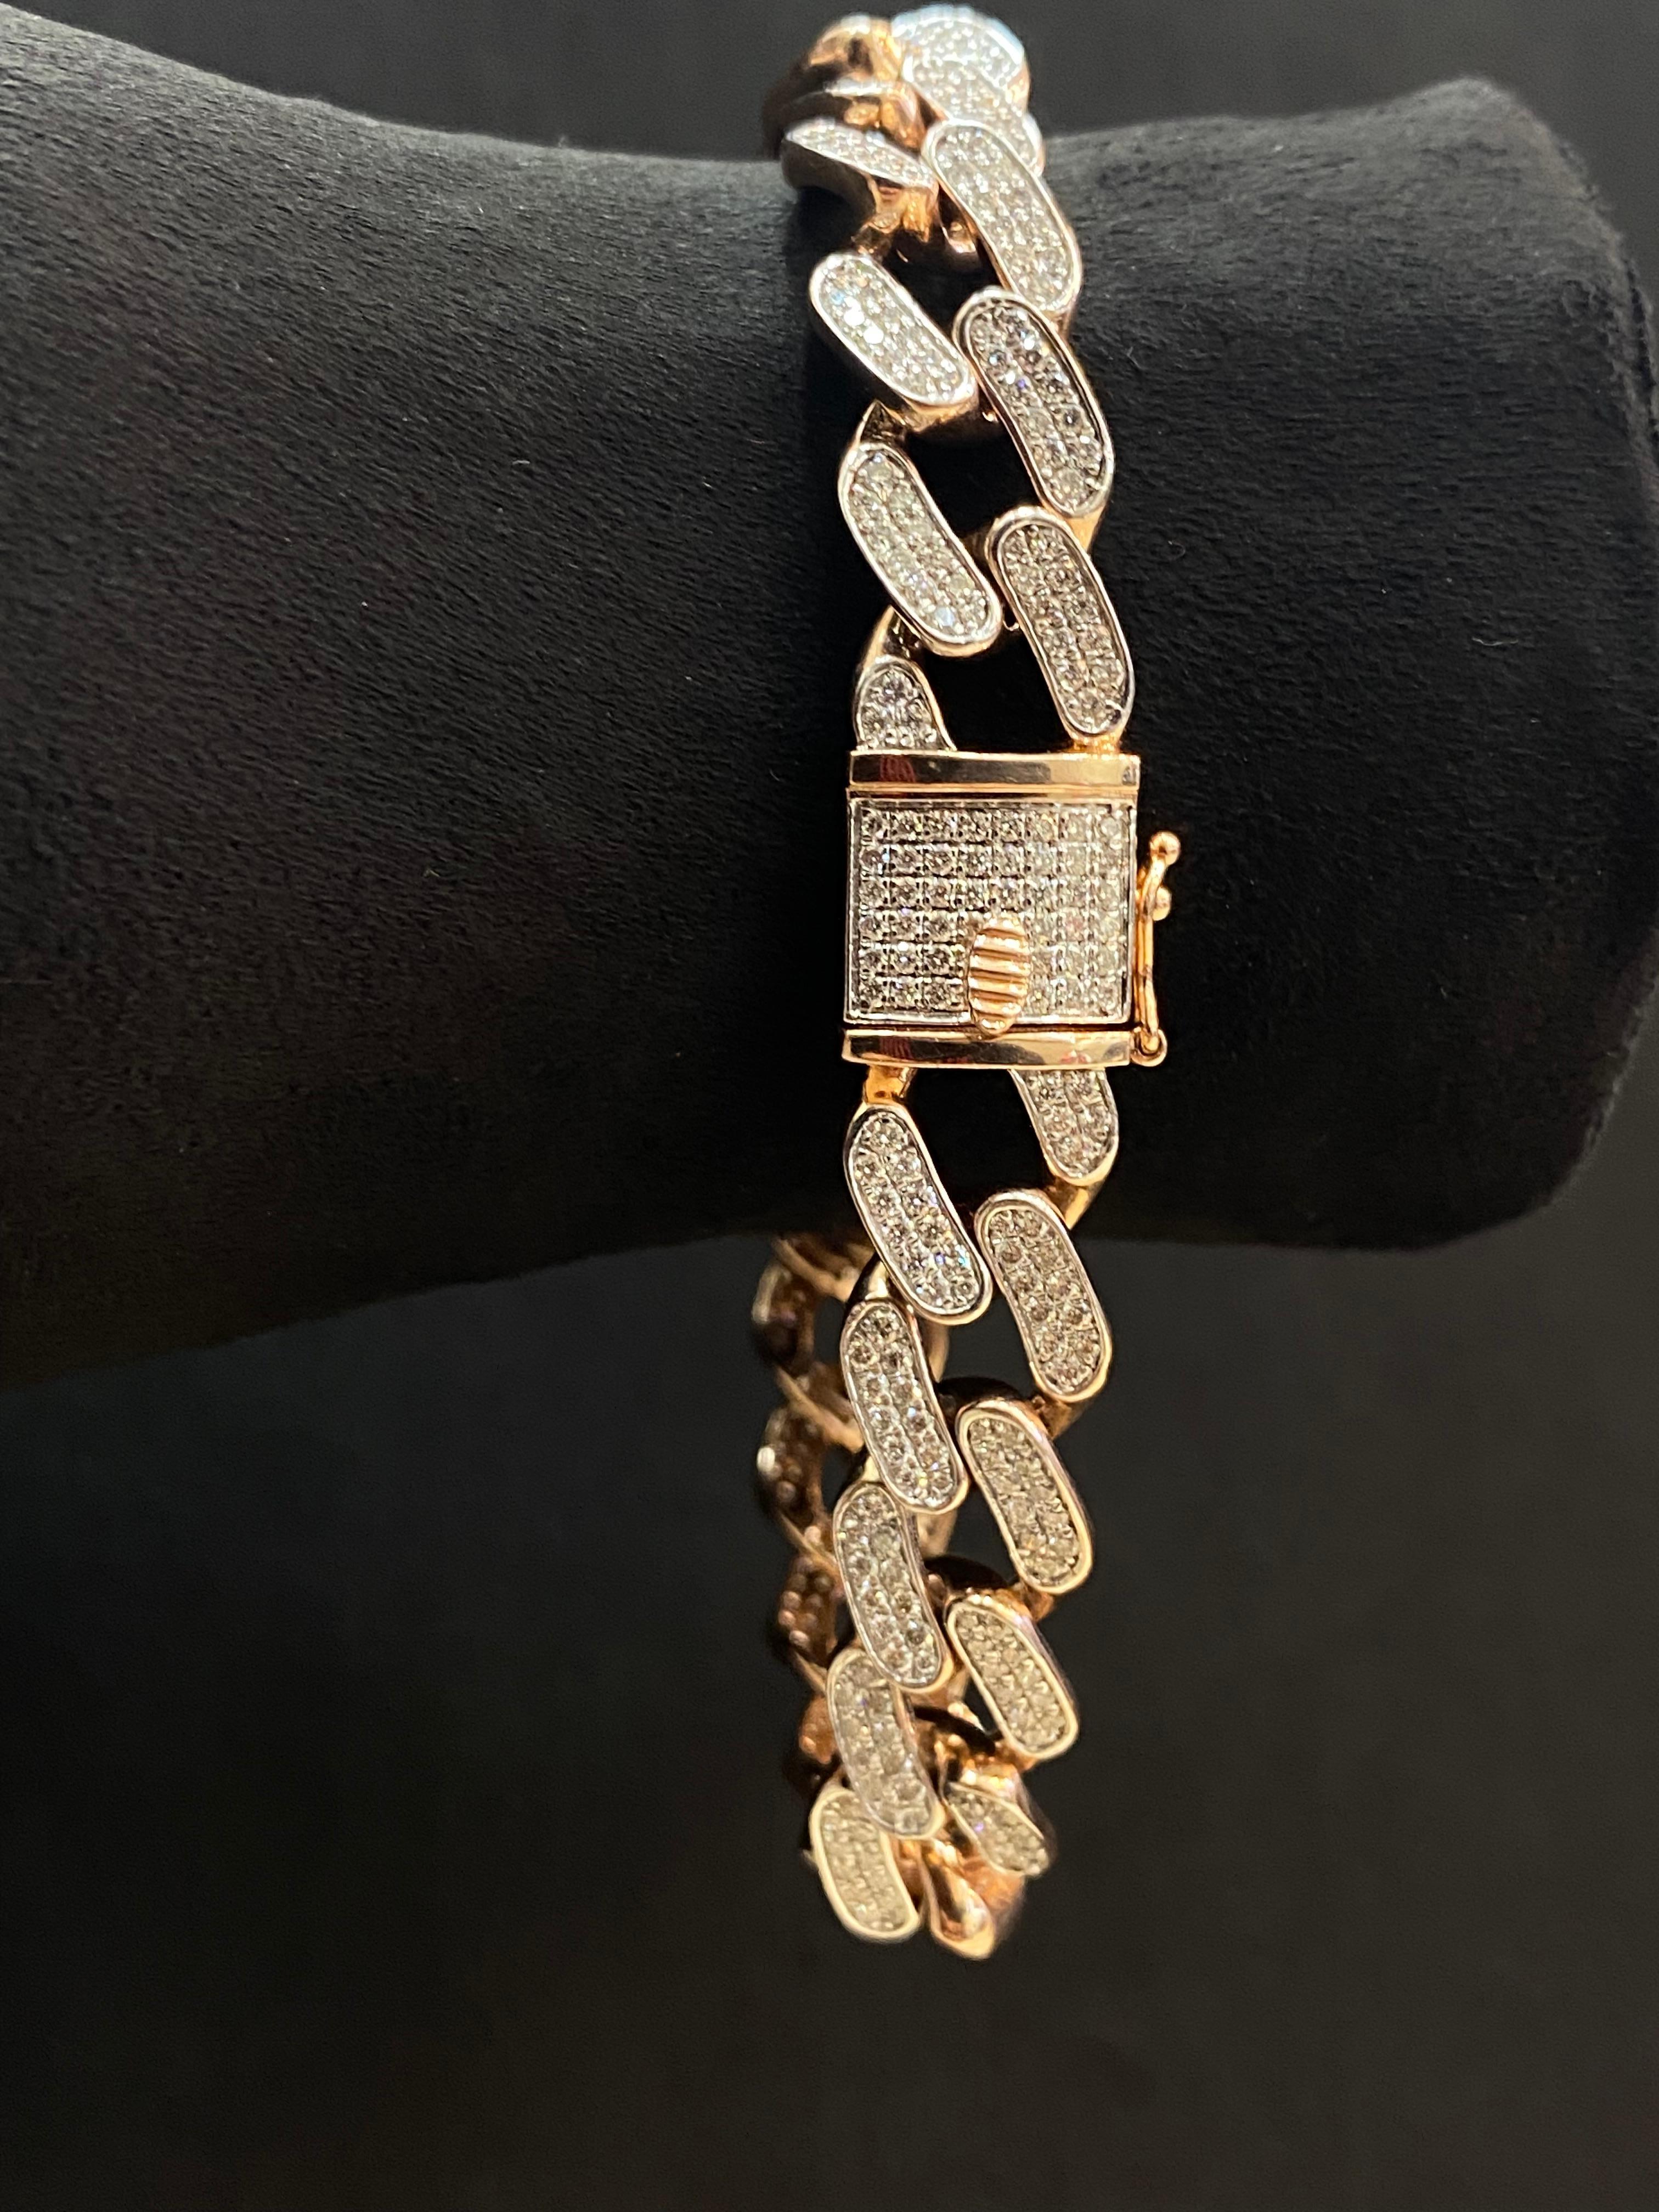 This men's tennis bracelet is crafted from stamped 14K rose gold and showcases an impressive arrangement of F/VS1 round brilliant cut diamonds, totaling 4.66 carats. These exquisite diamonds are elegantly nestled within the iconic cuban link design,